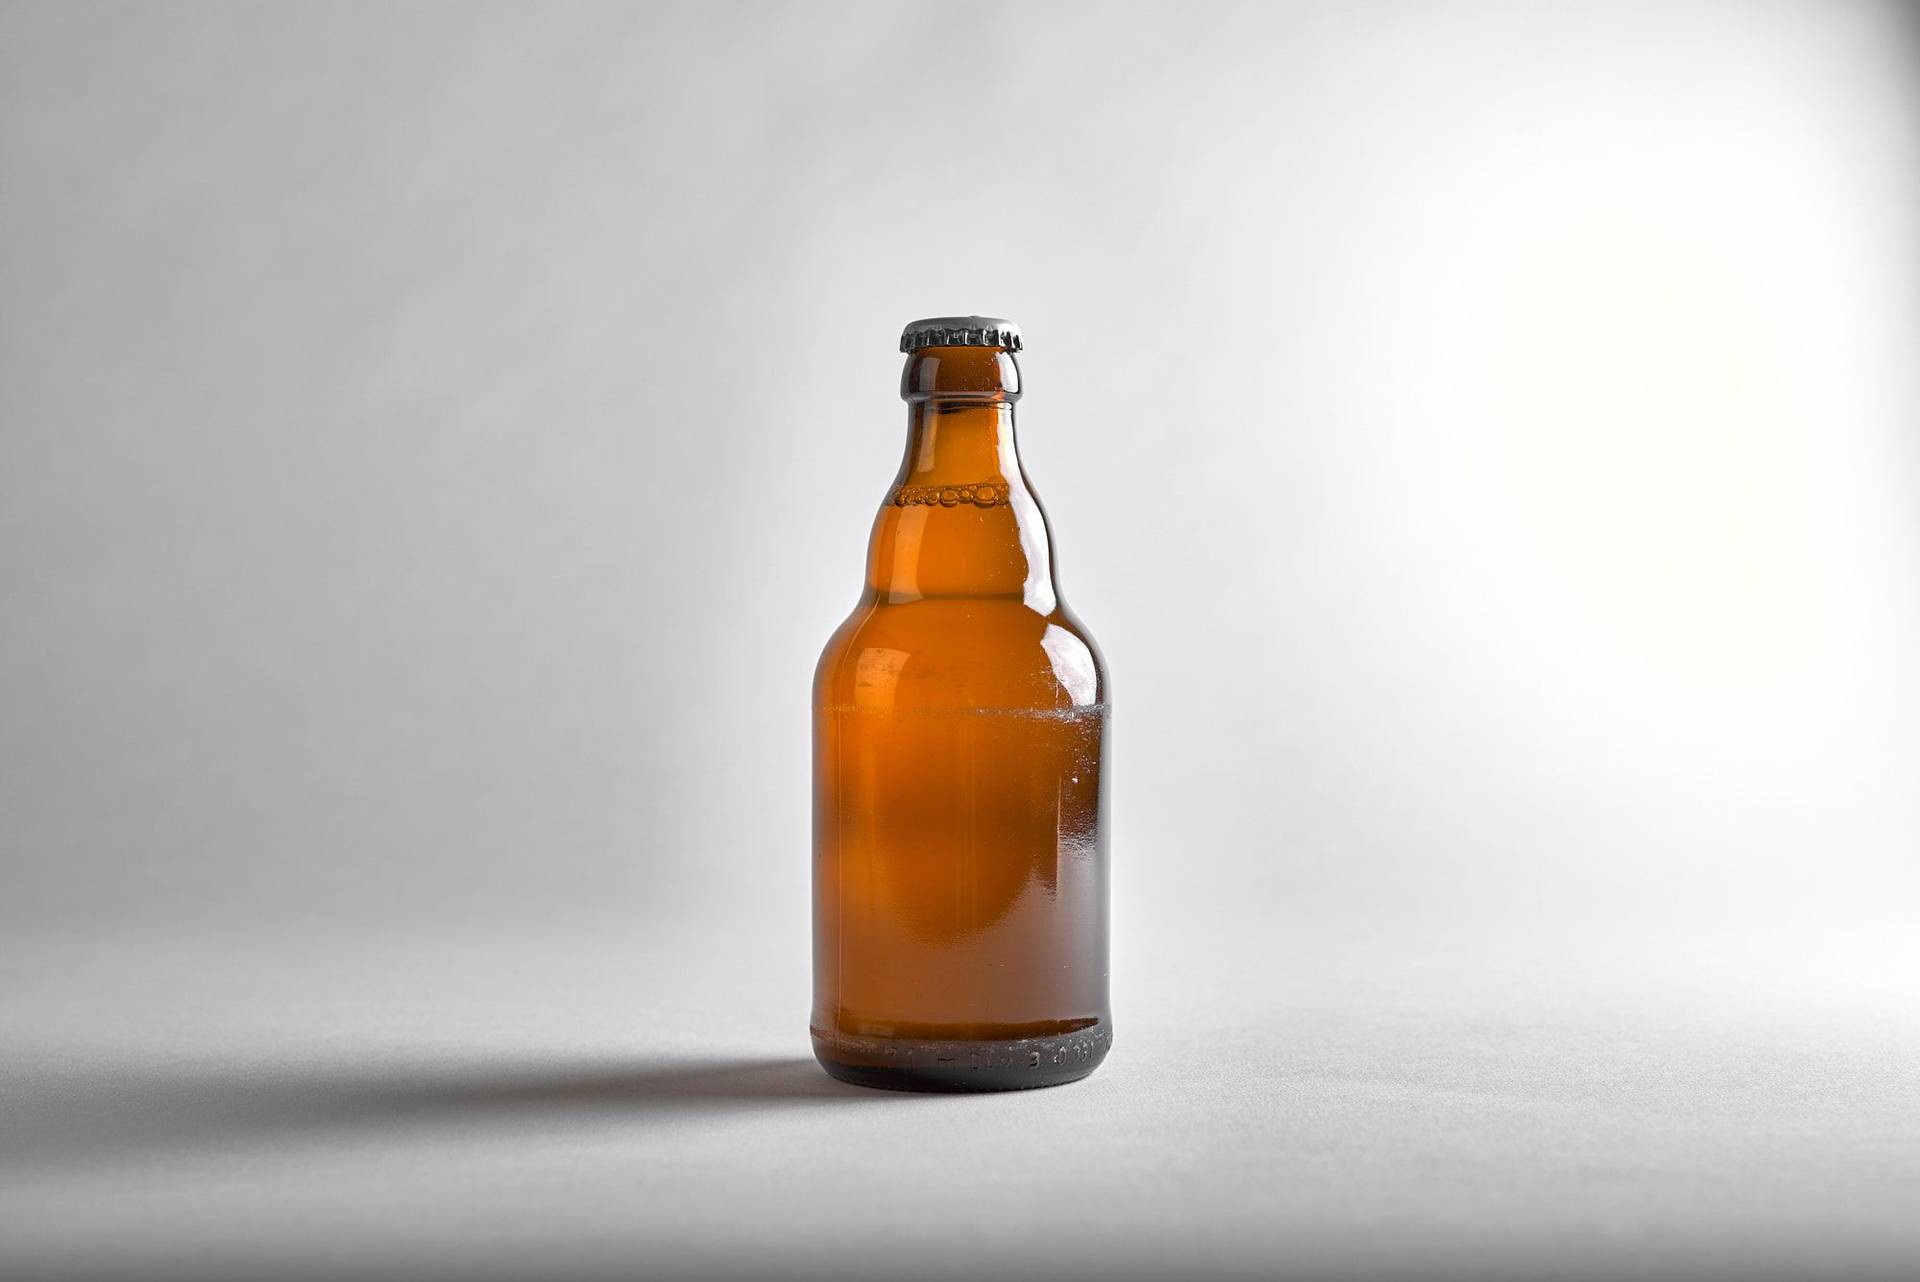 a bottle of berliner weisse on white background